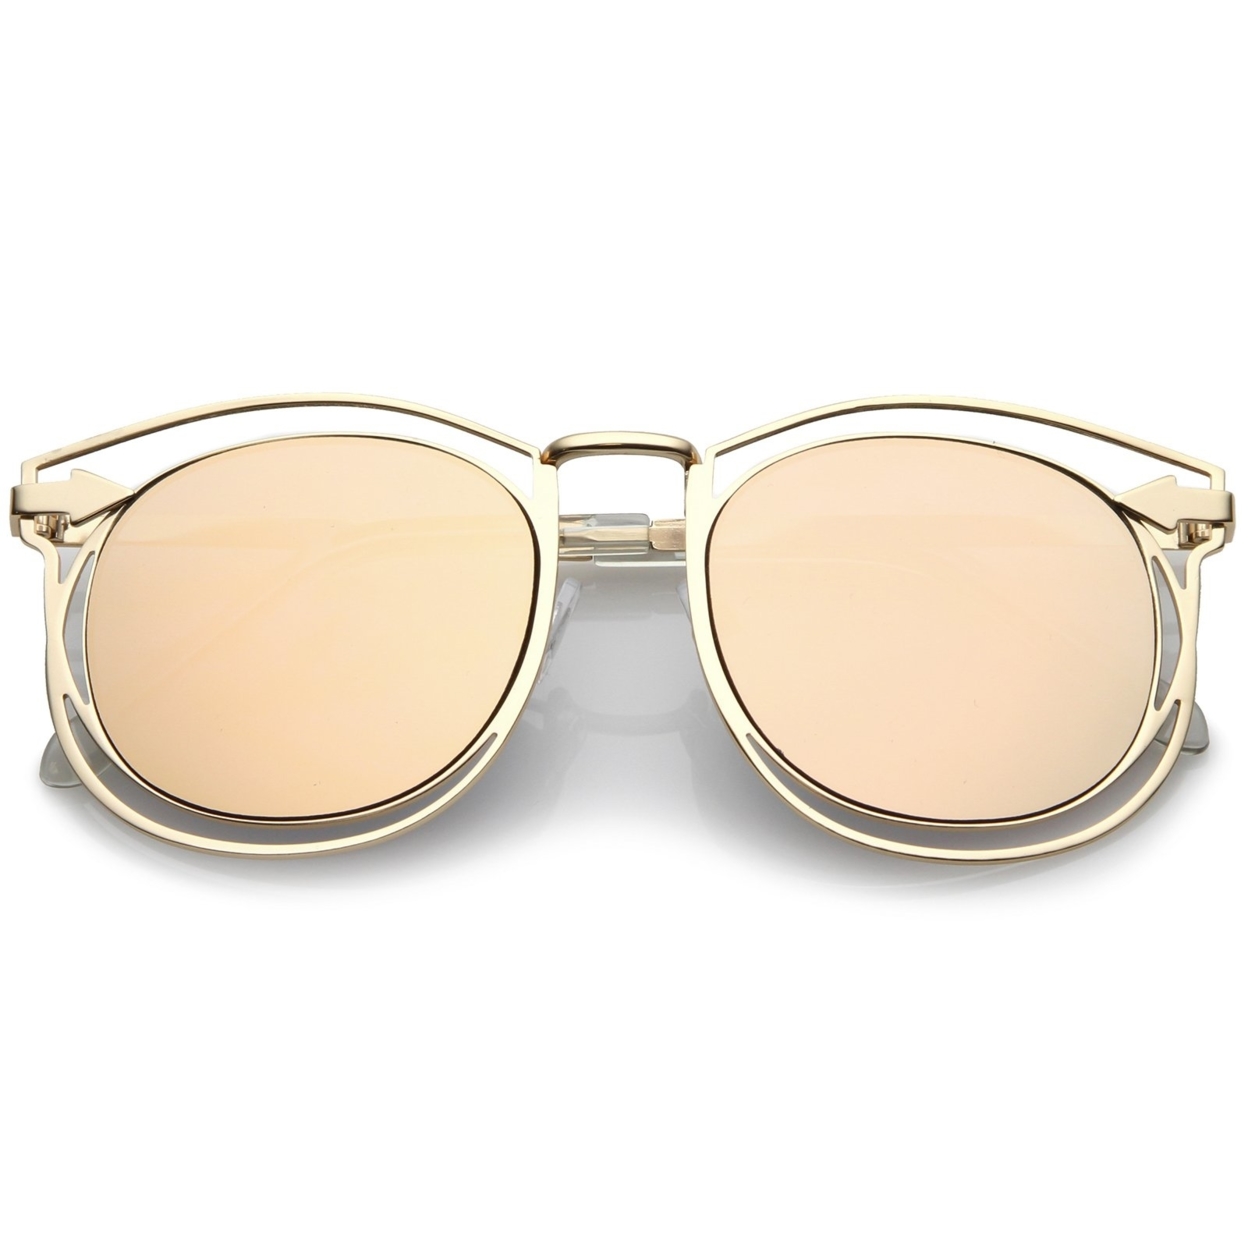 Oversize Open Metal Horn Rimmed Sunglasses With Arrow Design And Round Mirror Flat Lens 55mm - Gold / Silver Mirror